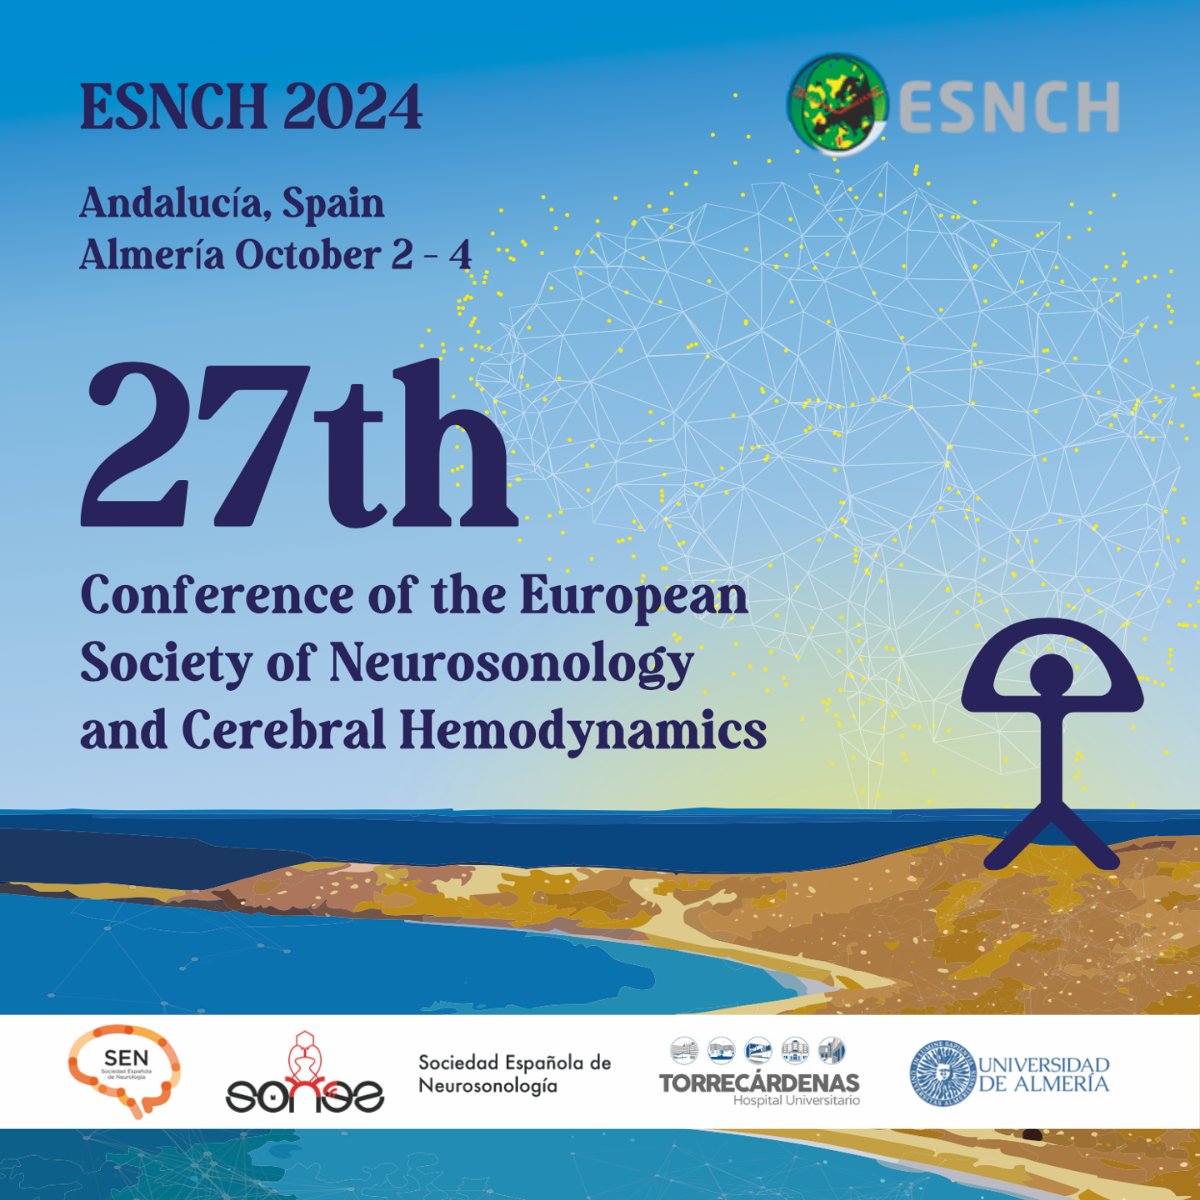 Are you on Spring Break or Easter vacation but not sure what to do? Prepare your abstract now for #ESNCH2024 and plan your next trip to Andalucía, #Spain to meet with the international #Neurosonology community and enjoy some sunshine in October. 🧠☀️👨‍🔬 esnch.org/events/esnch-c…